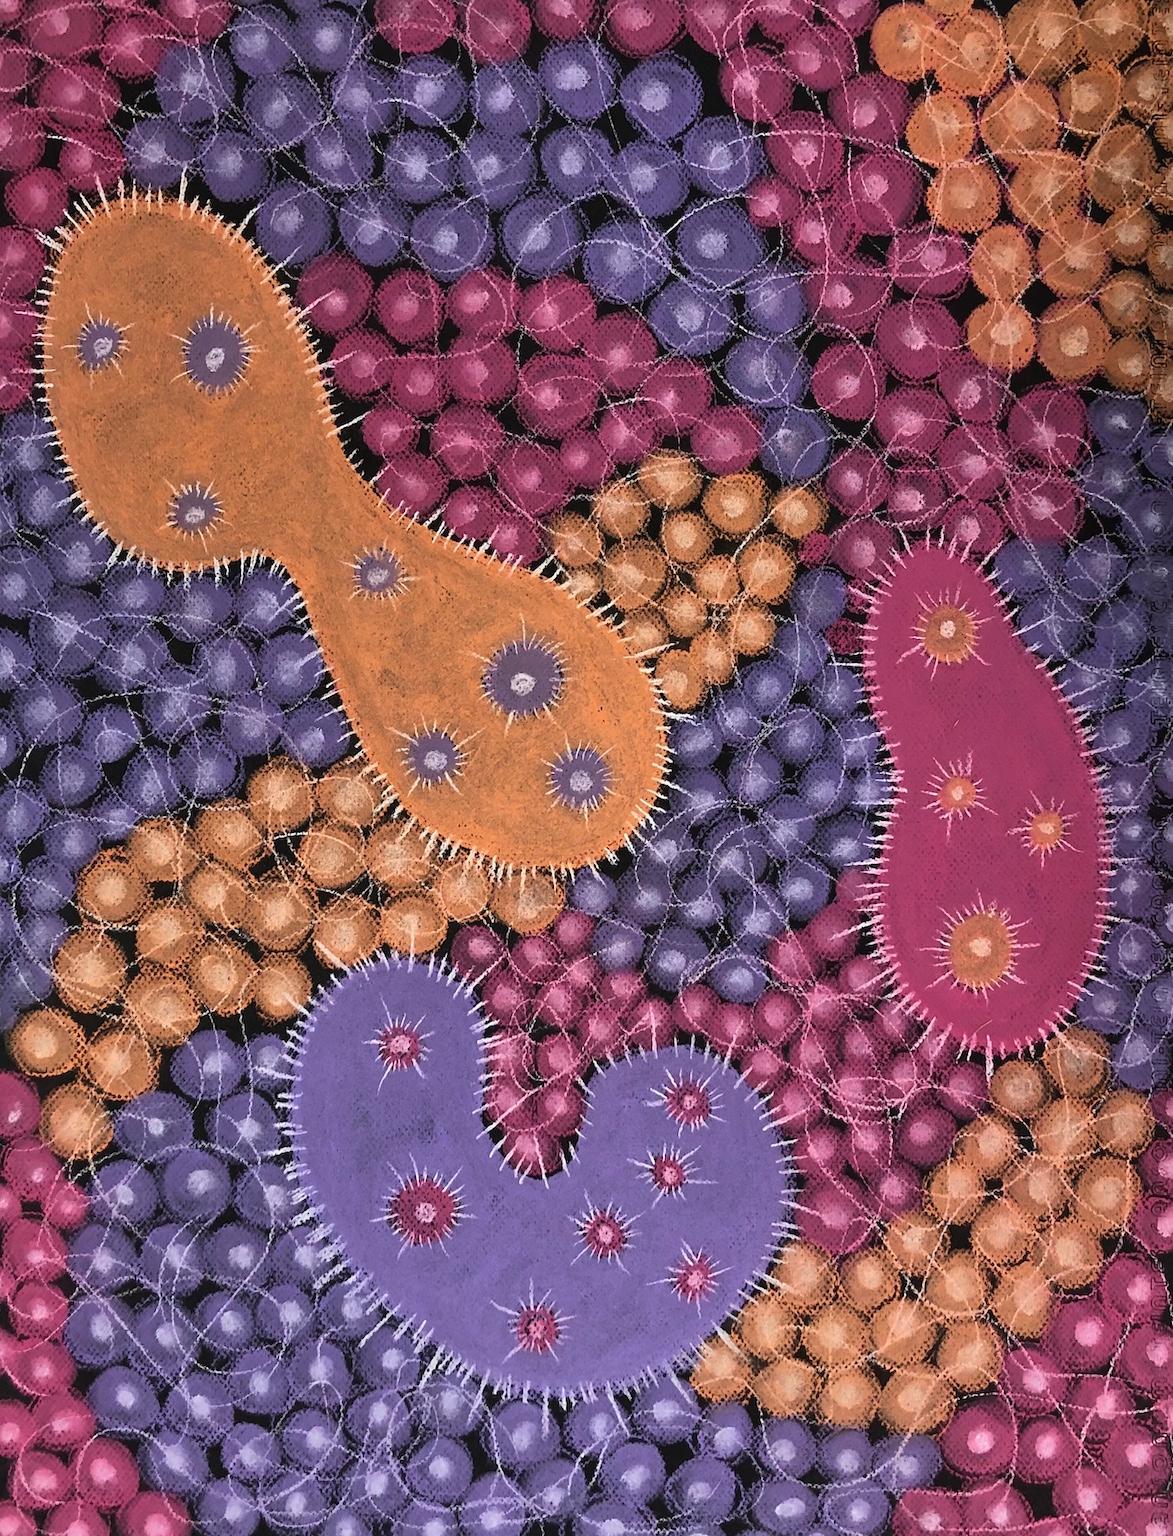 "Microbial Gathering 1", microscopic, orange, pink, purple, pastel drawing - Art by Kay Hartung